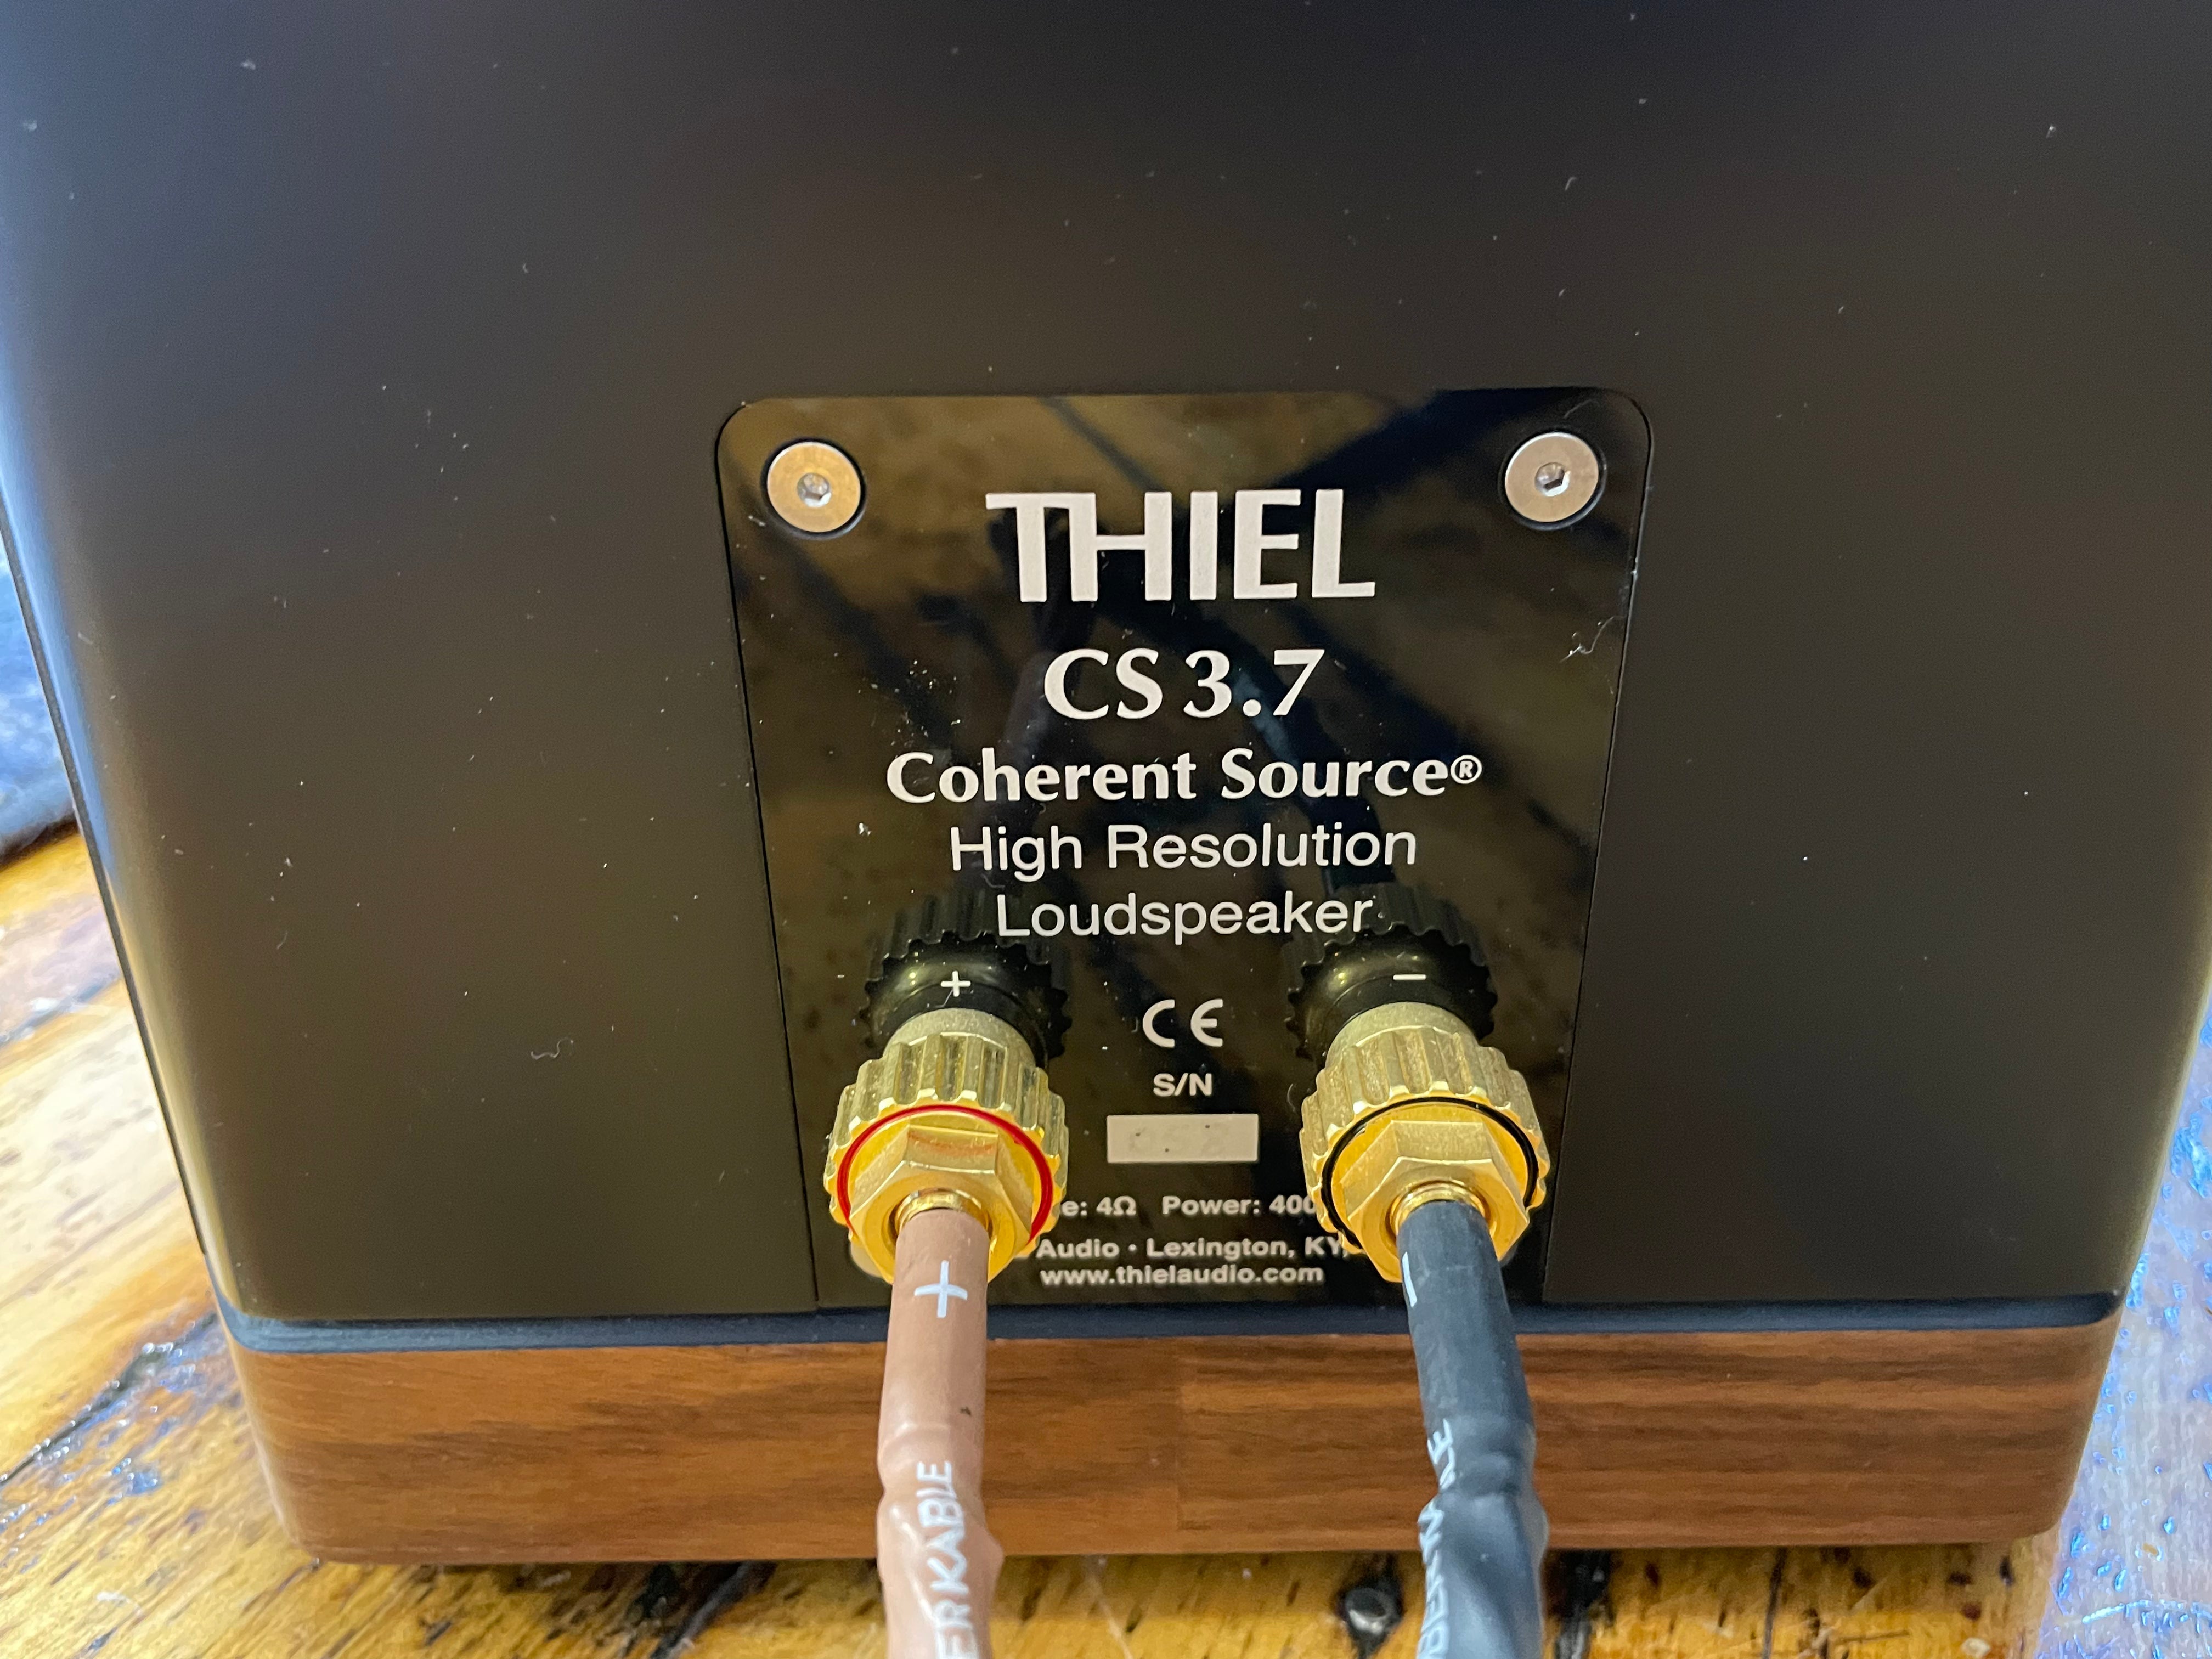 Thiel Audio CS3.7 - Made It Ma! Top of The World! - SOLD